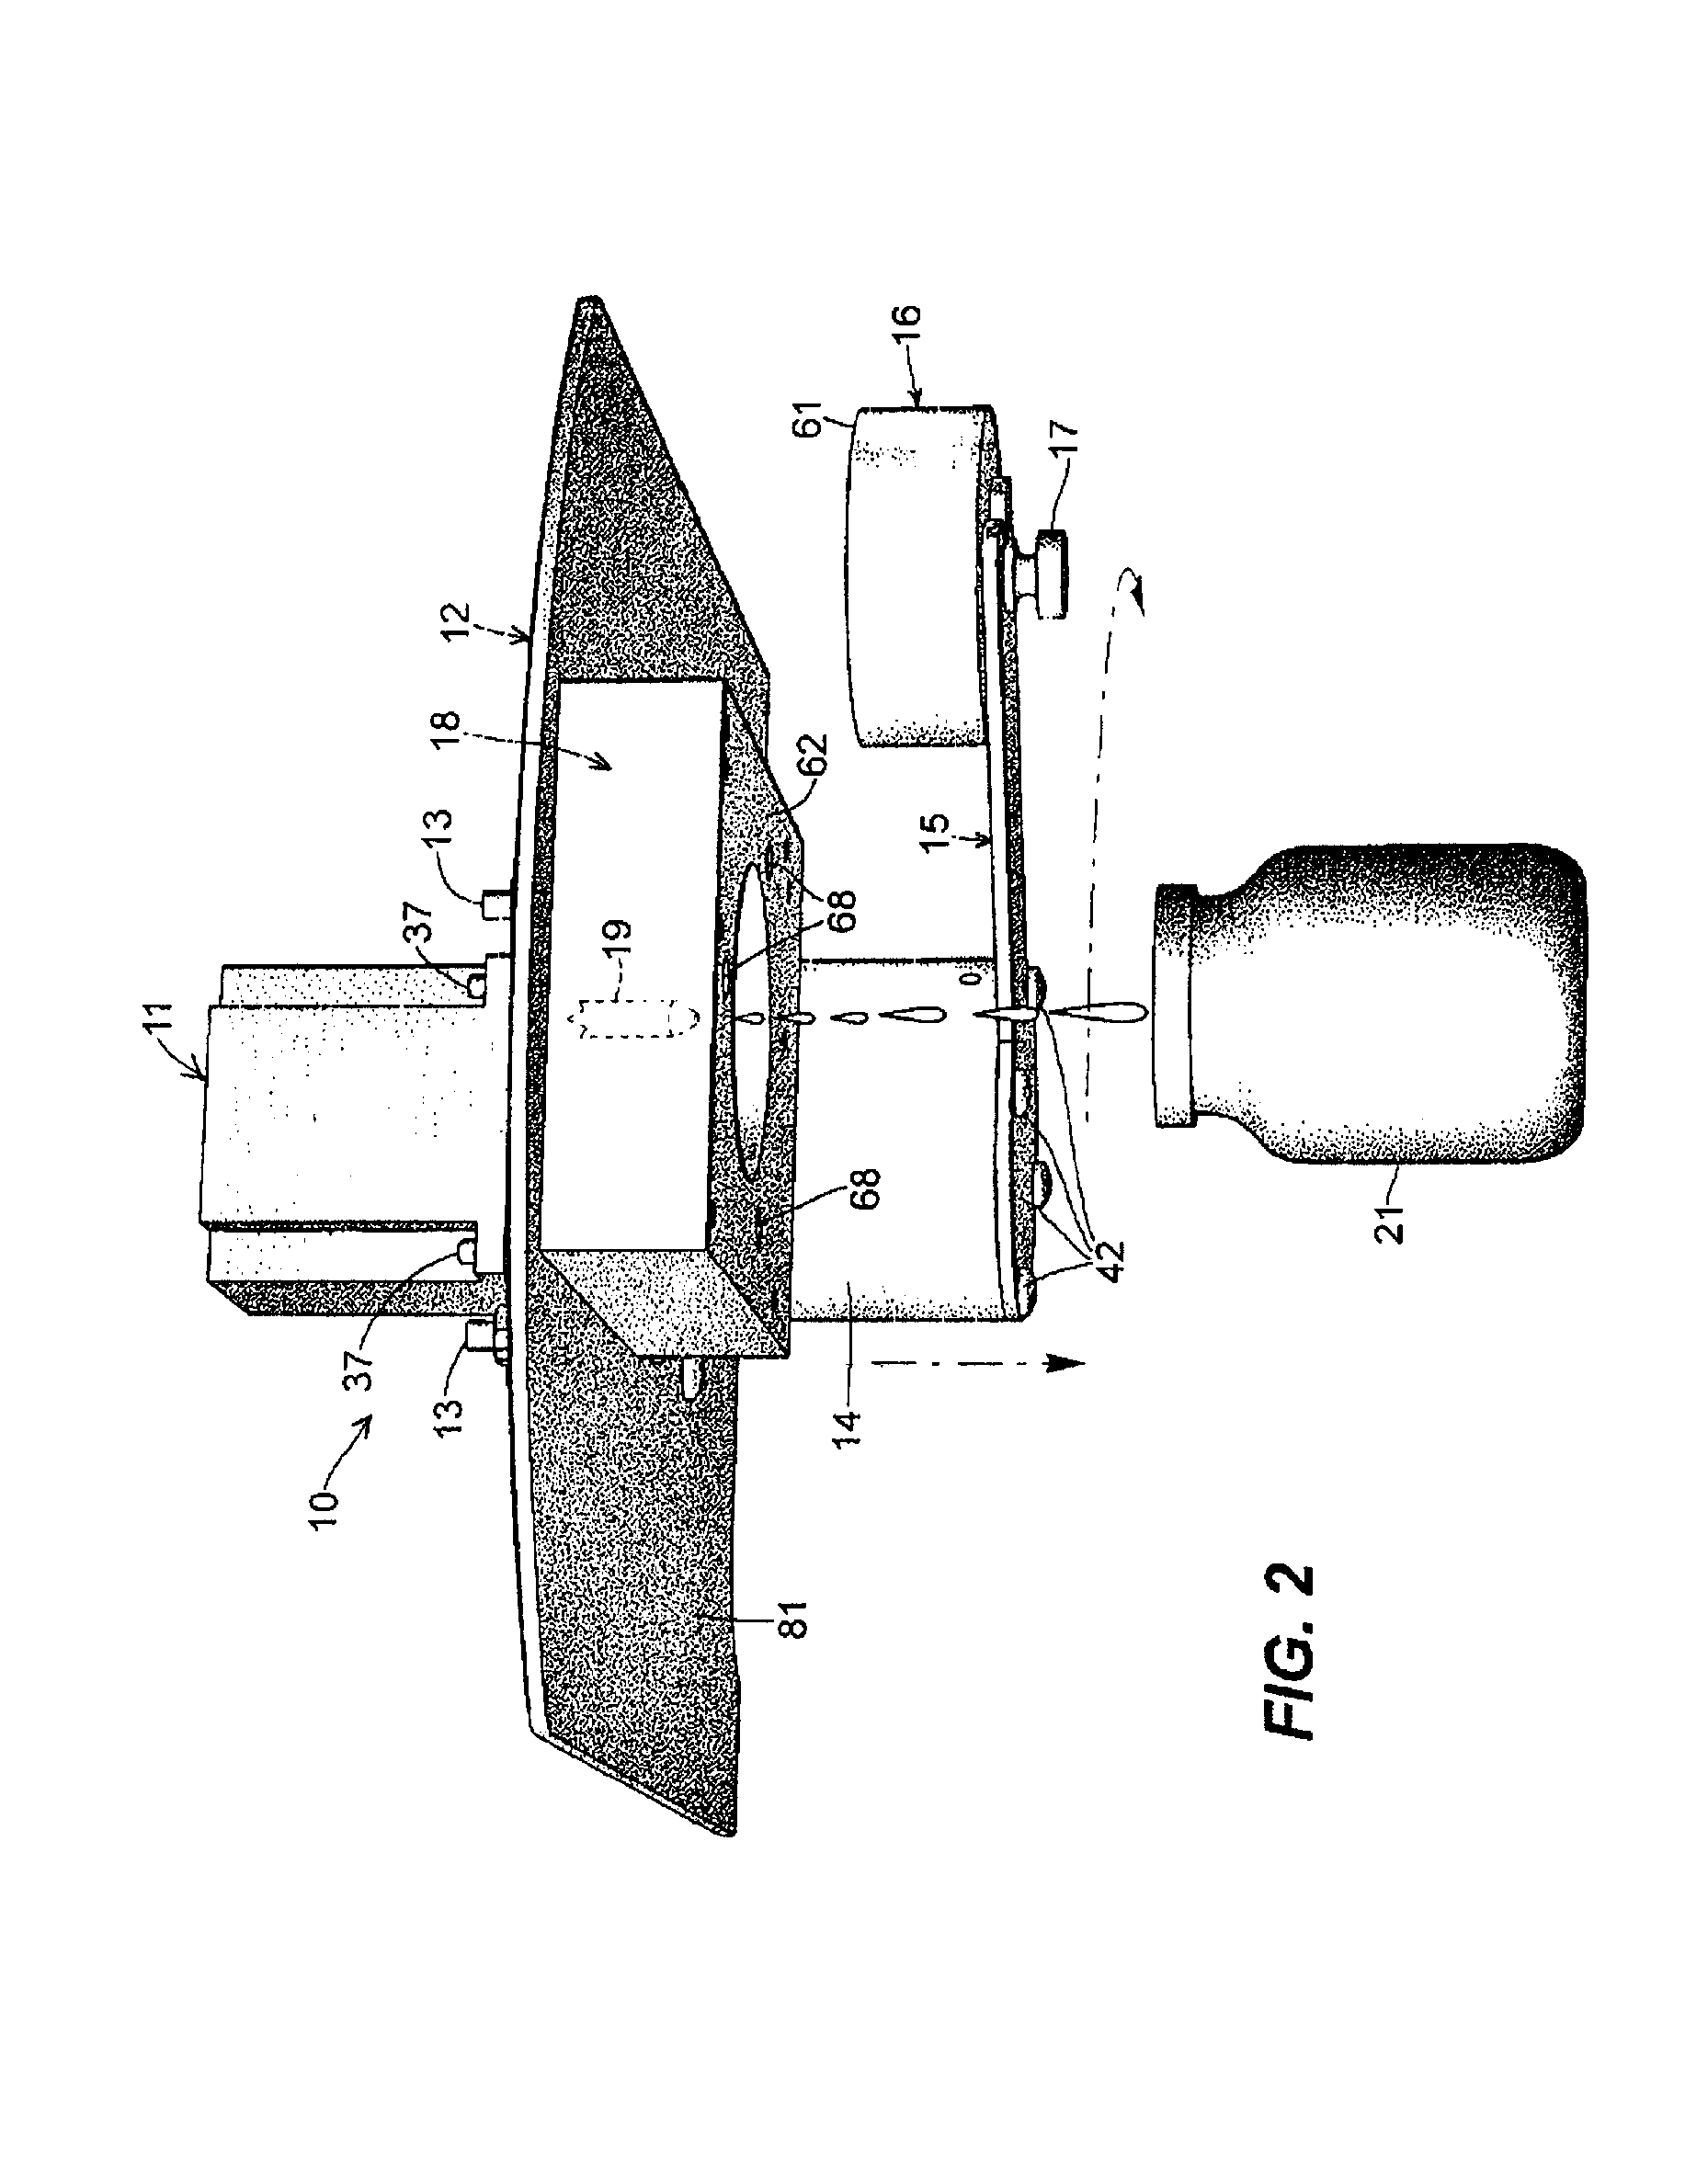 Articulated nozzle closure for fluid dispensers